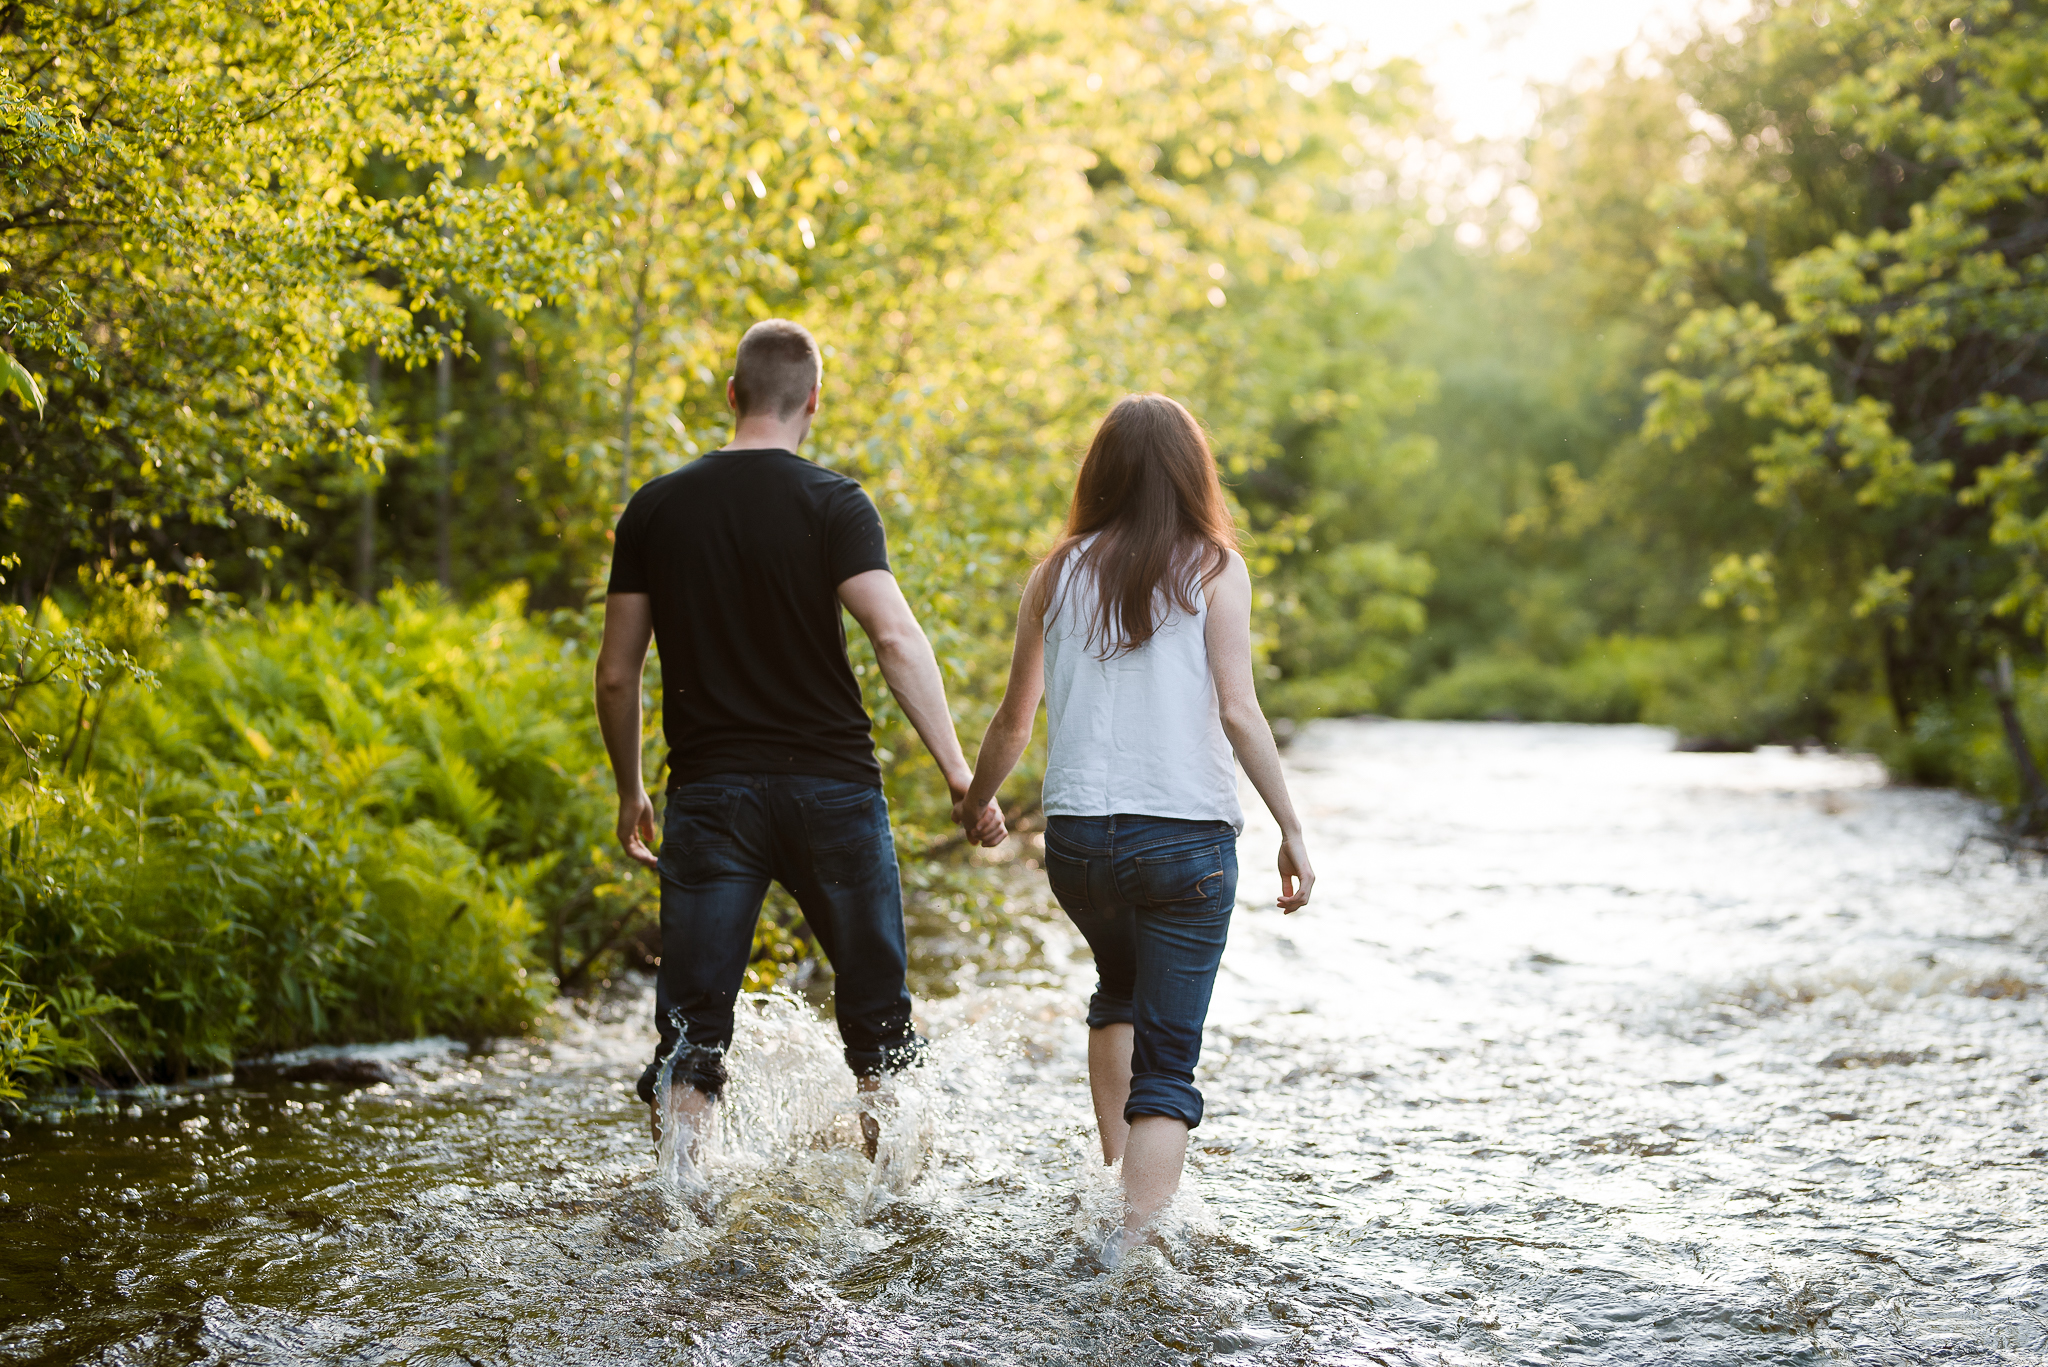 Couples457NaomiLuciennePhotography062019-Edit.jpg